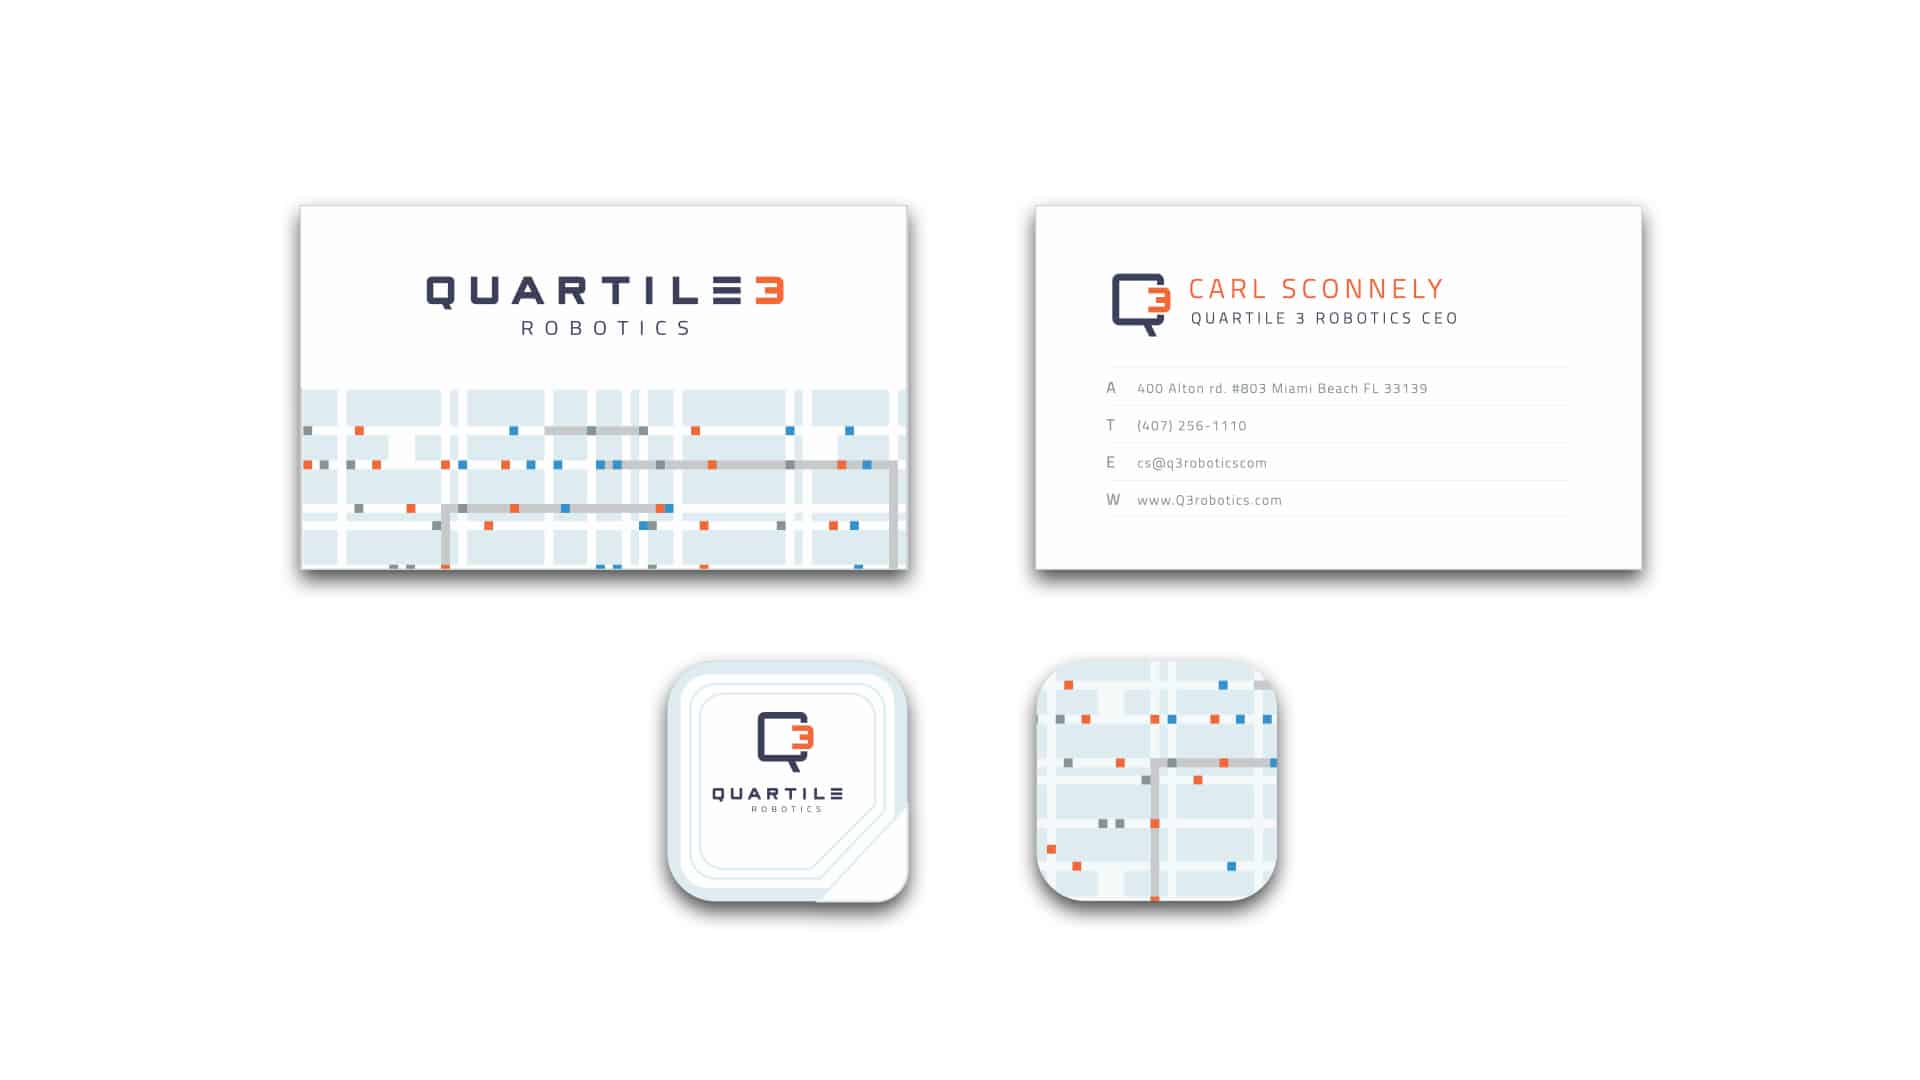 Quartile 3 Robotics business cards and stickers in white, orange, and navy with circuitry design elements.